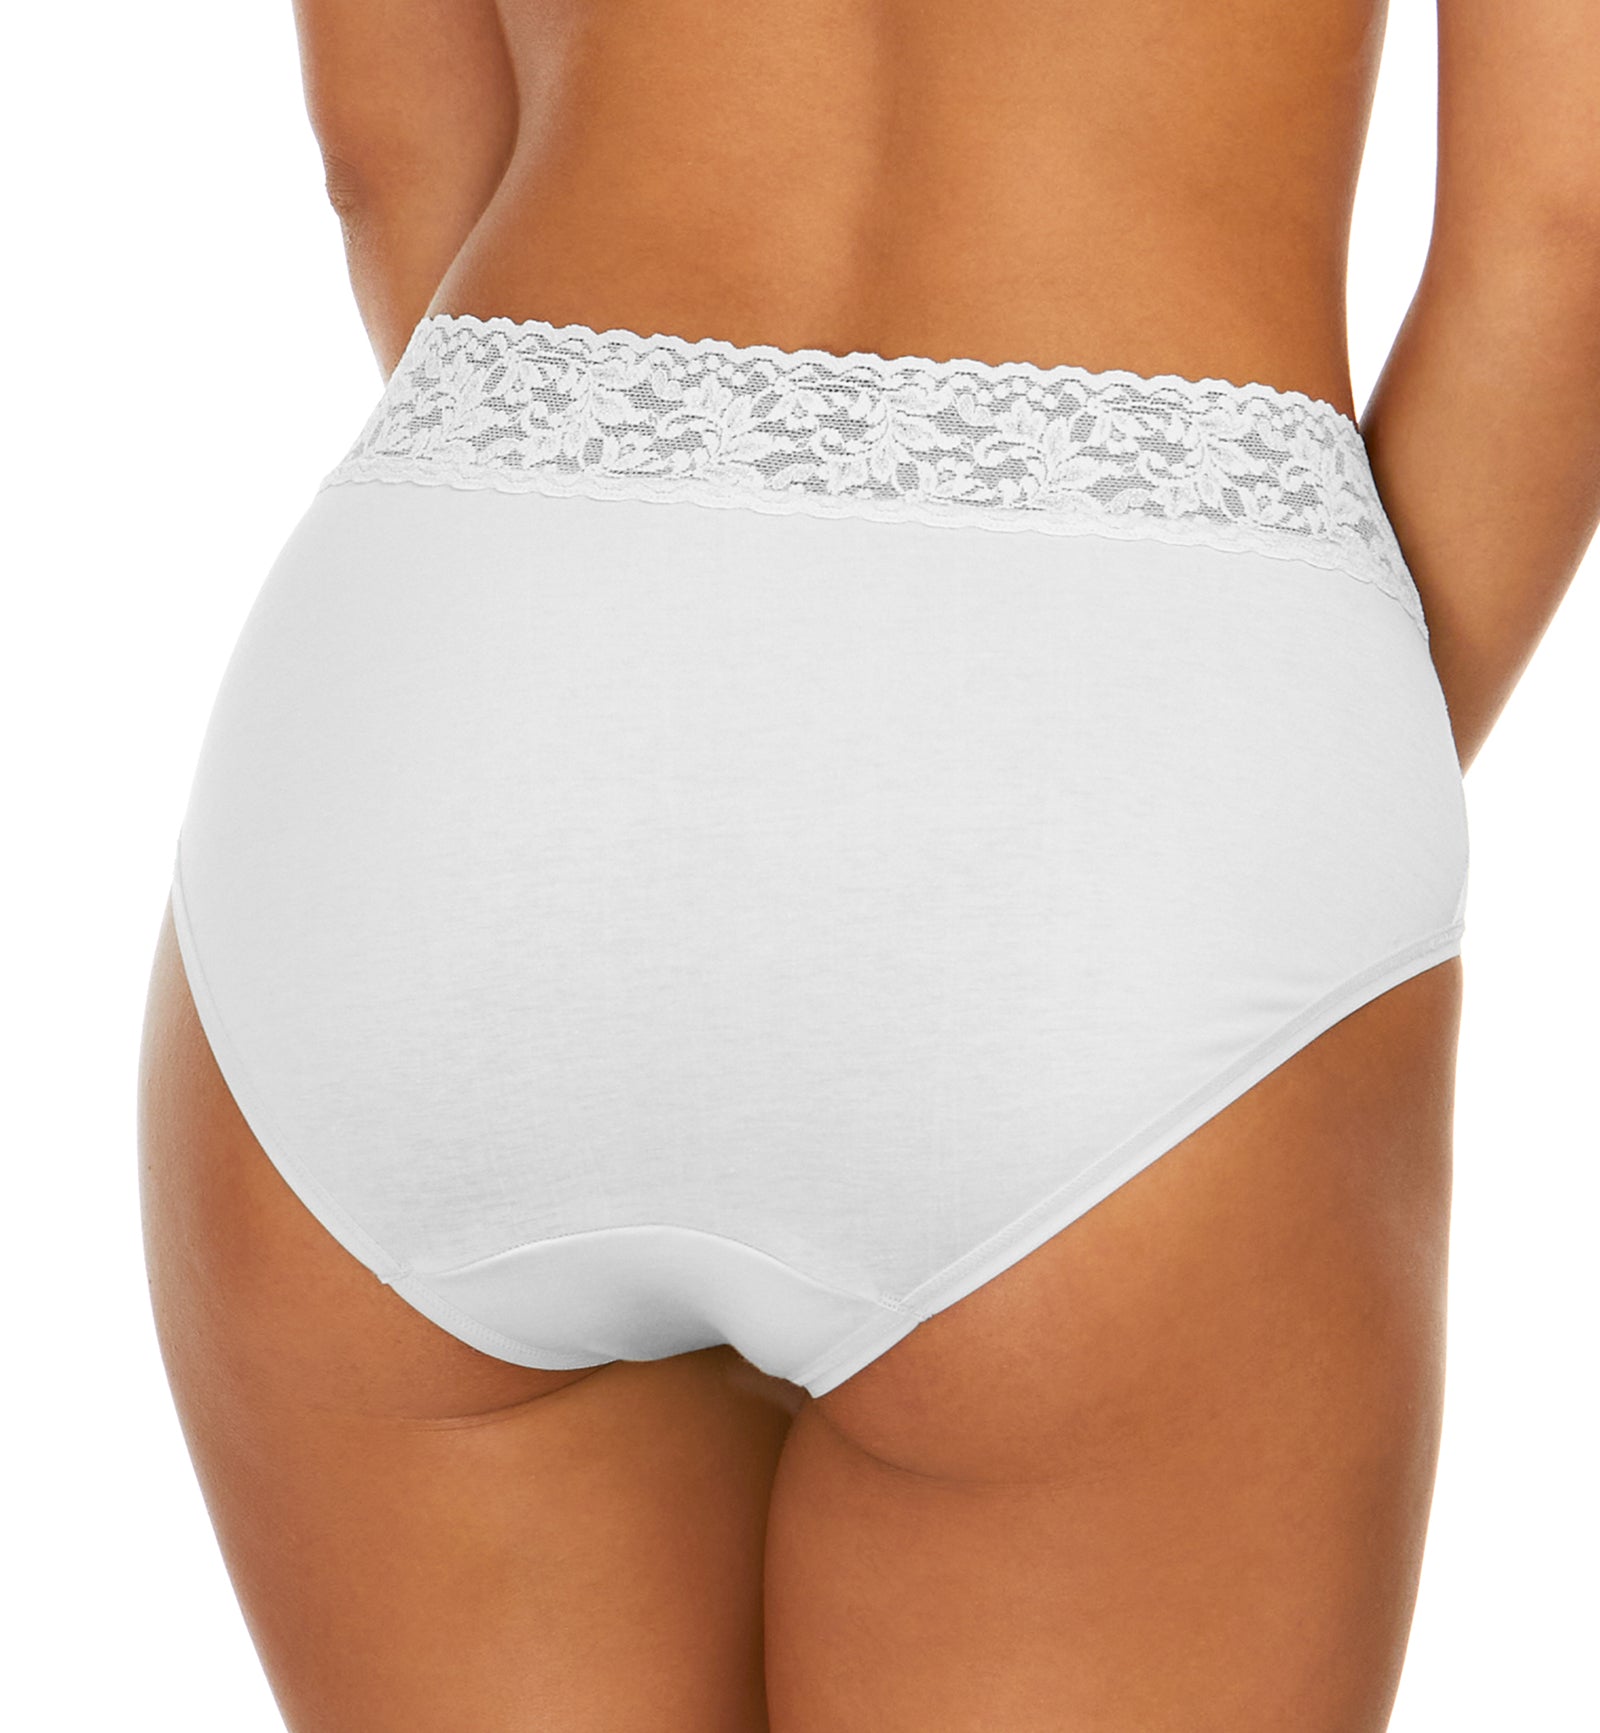 Hanky Panky Cotton French Brief with Lace (892461),White,Small - White,Small